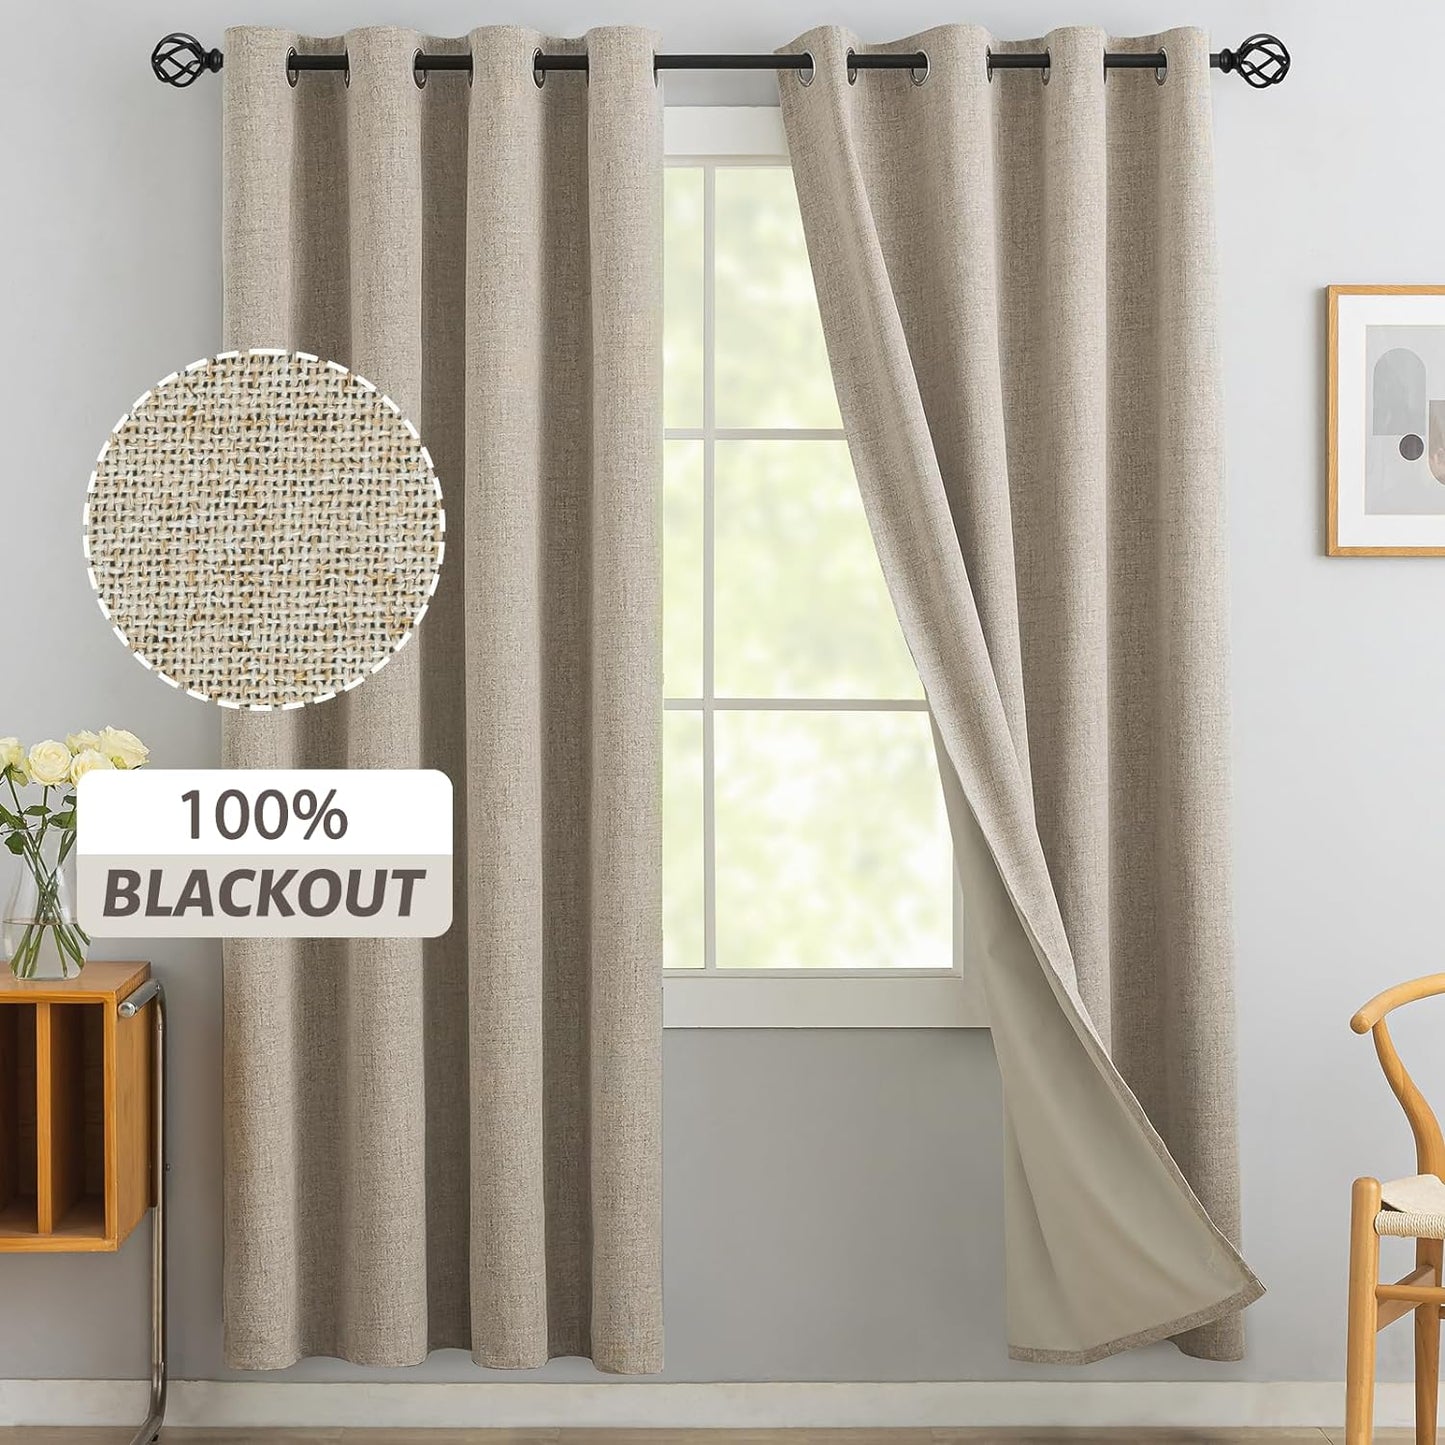 Yakamok Natural Linen Curtains 100% Blackout 84 Inches Long,Room Darkening Textured Curtains for Living Room Thermal Grommet Bedroom Curtains 2 Panels with Greyish White Liner  Yakamok Natural Linen 52W X 72L / 2 Panels 